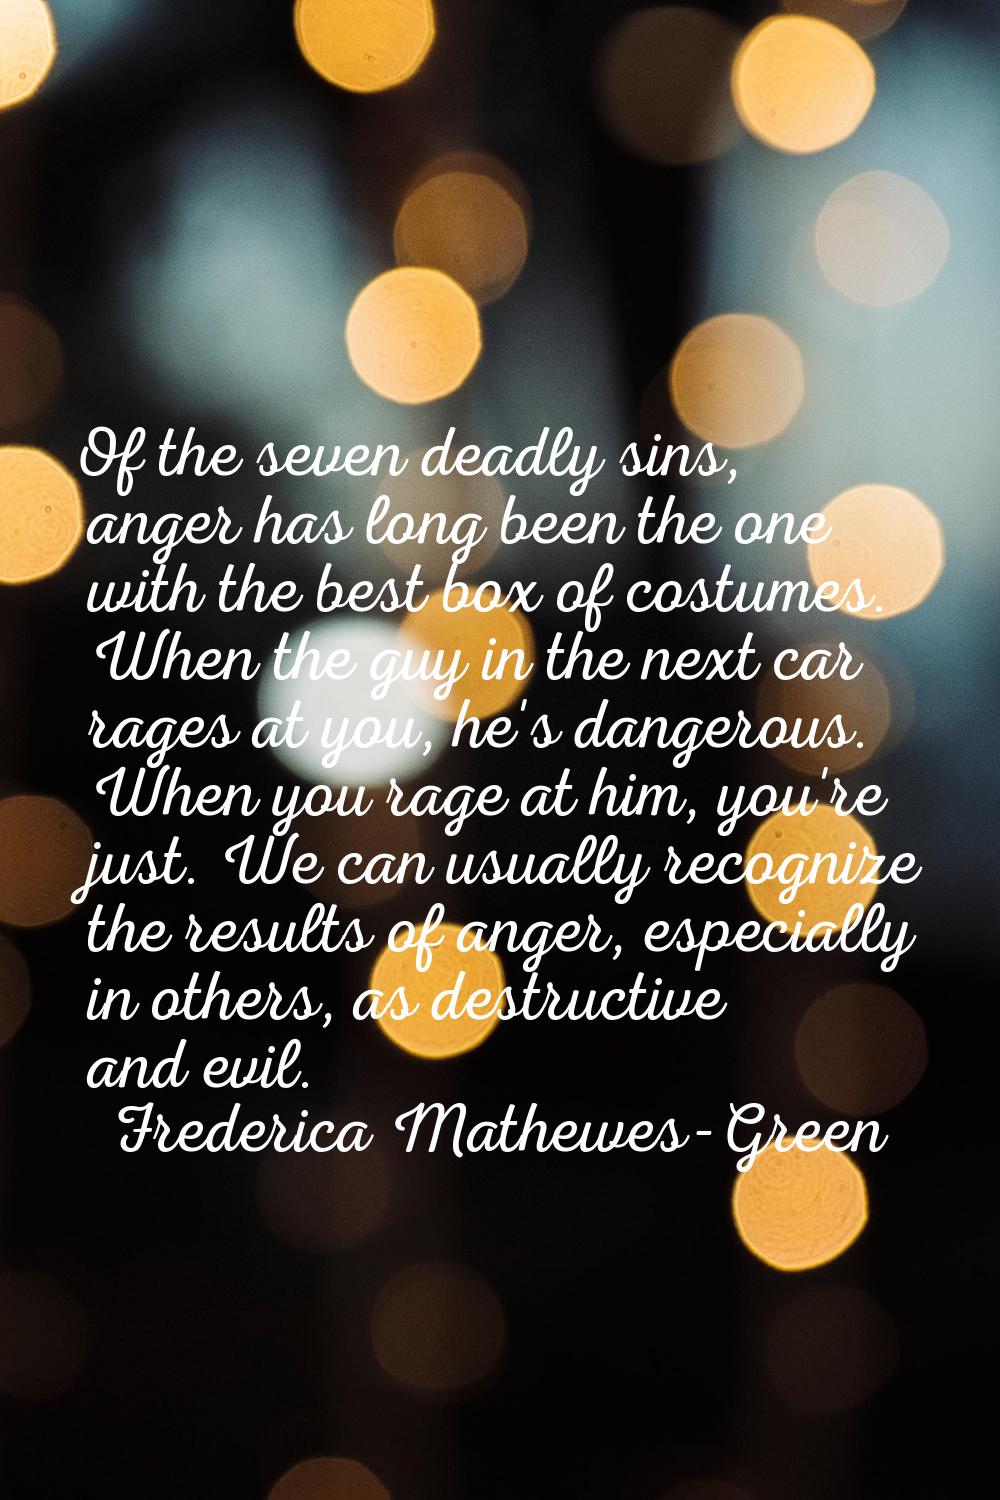 Of the seven deadly sins, anger has long been the one with the best box of costumes. When the guy i